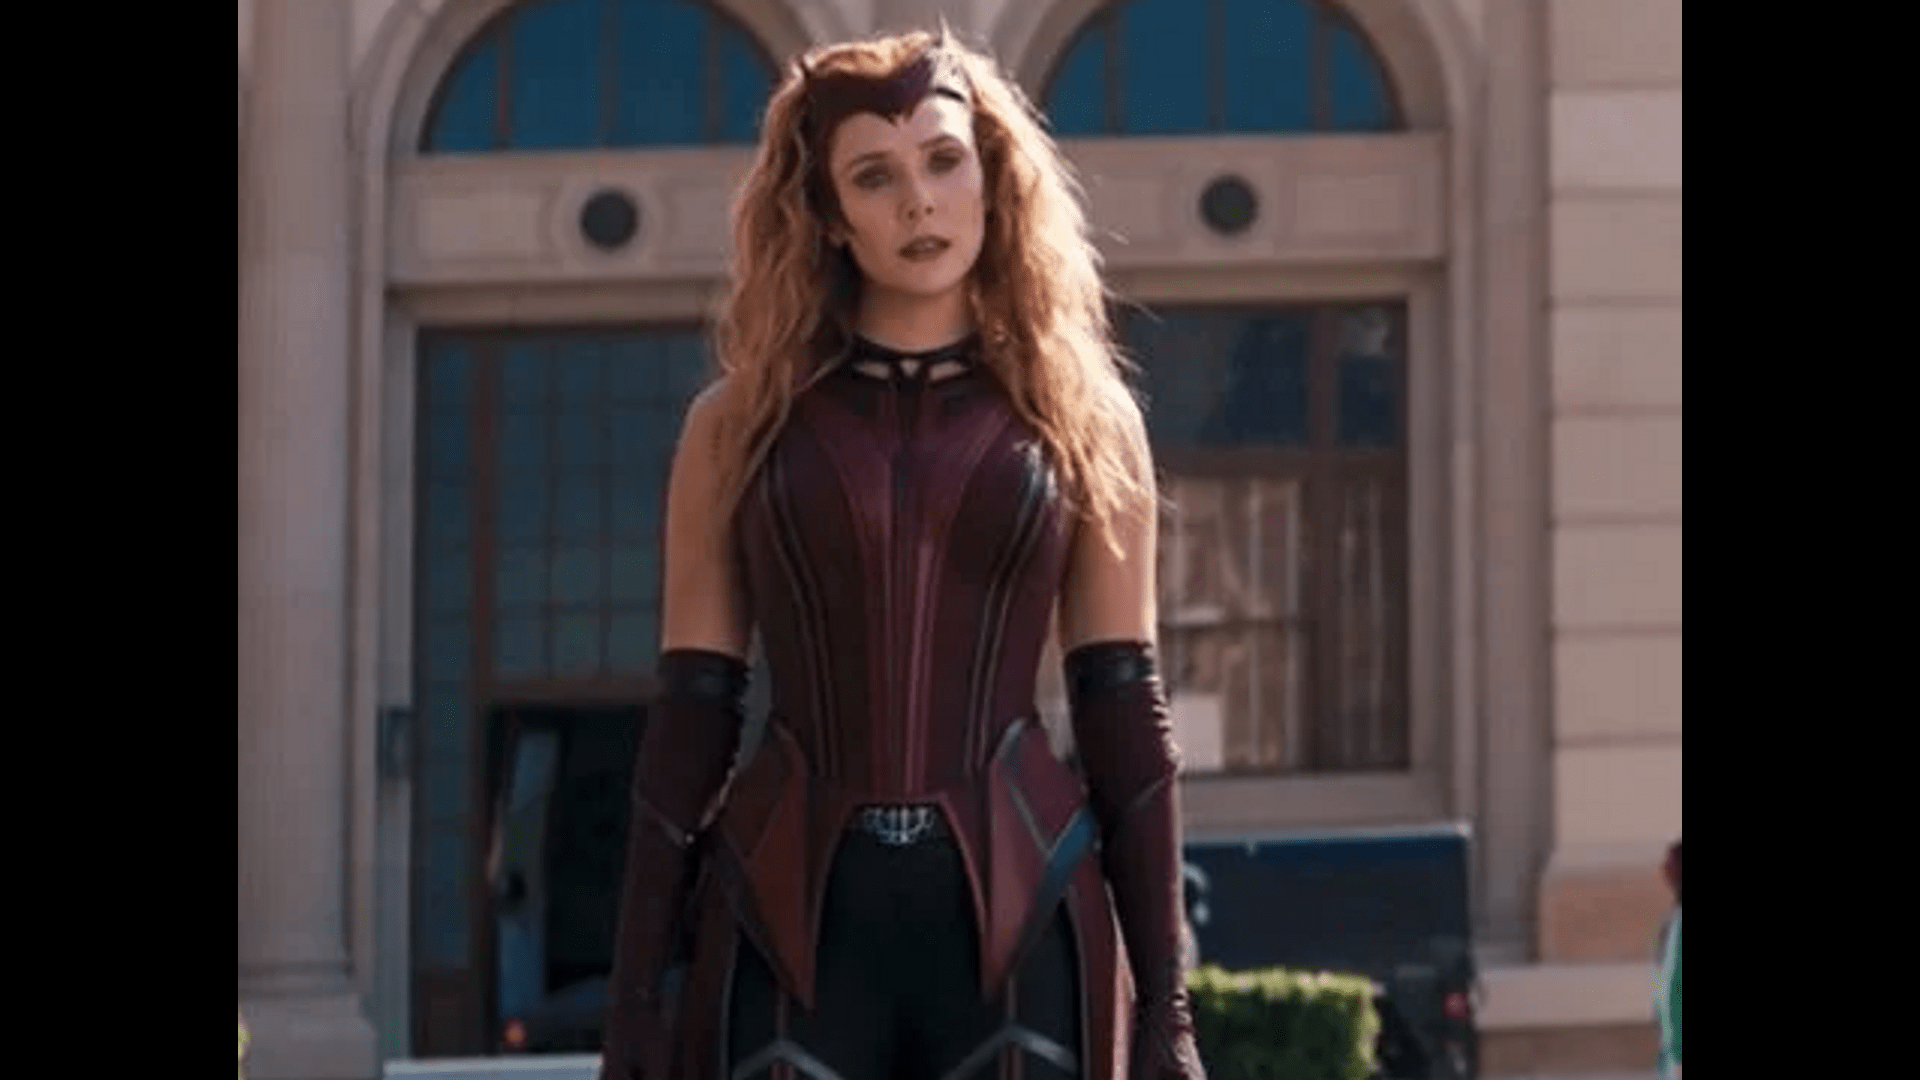 mcu-star-elizabeth-olsen-said-that-playing-the-hero-is-not-attractive